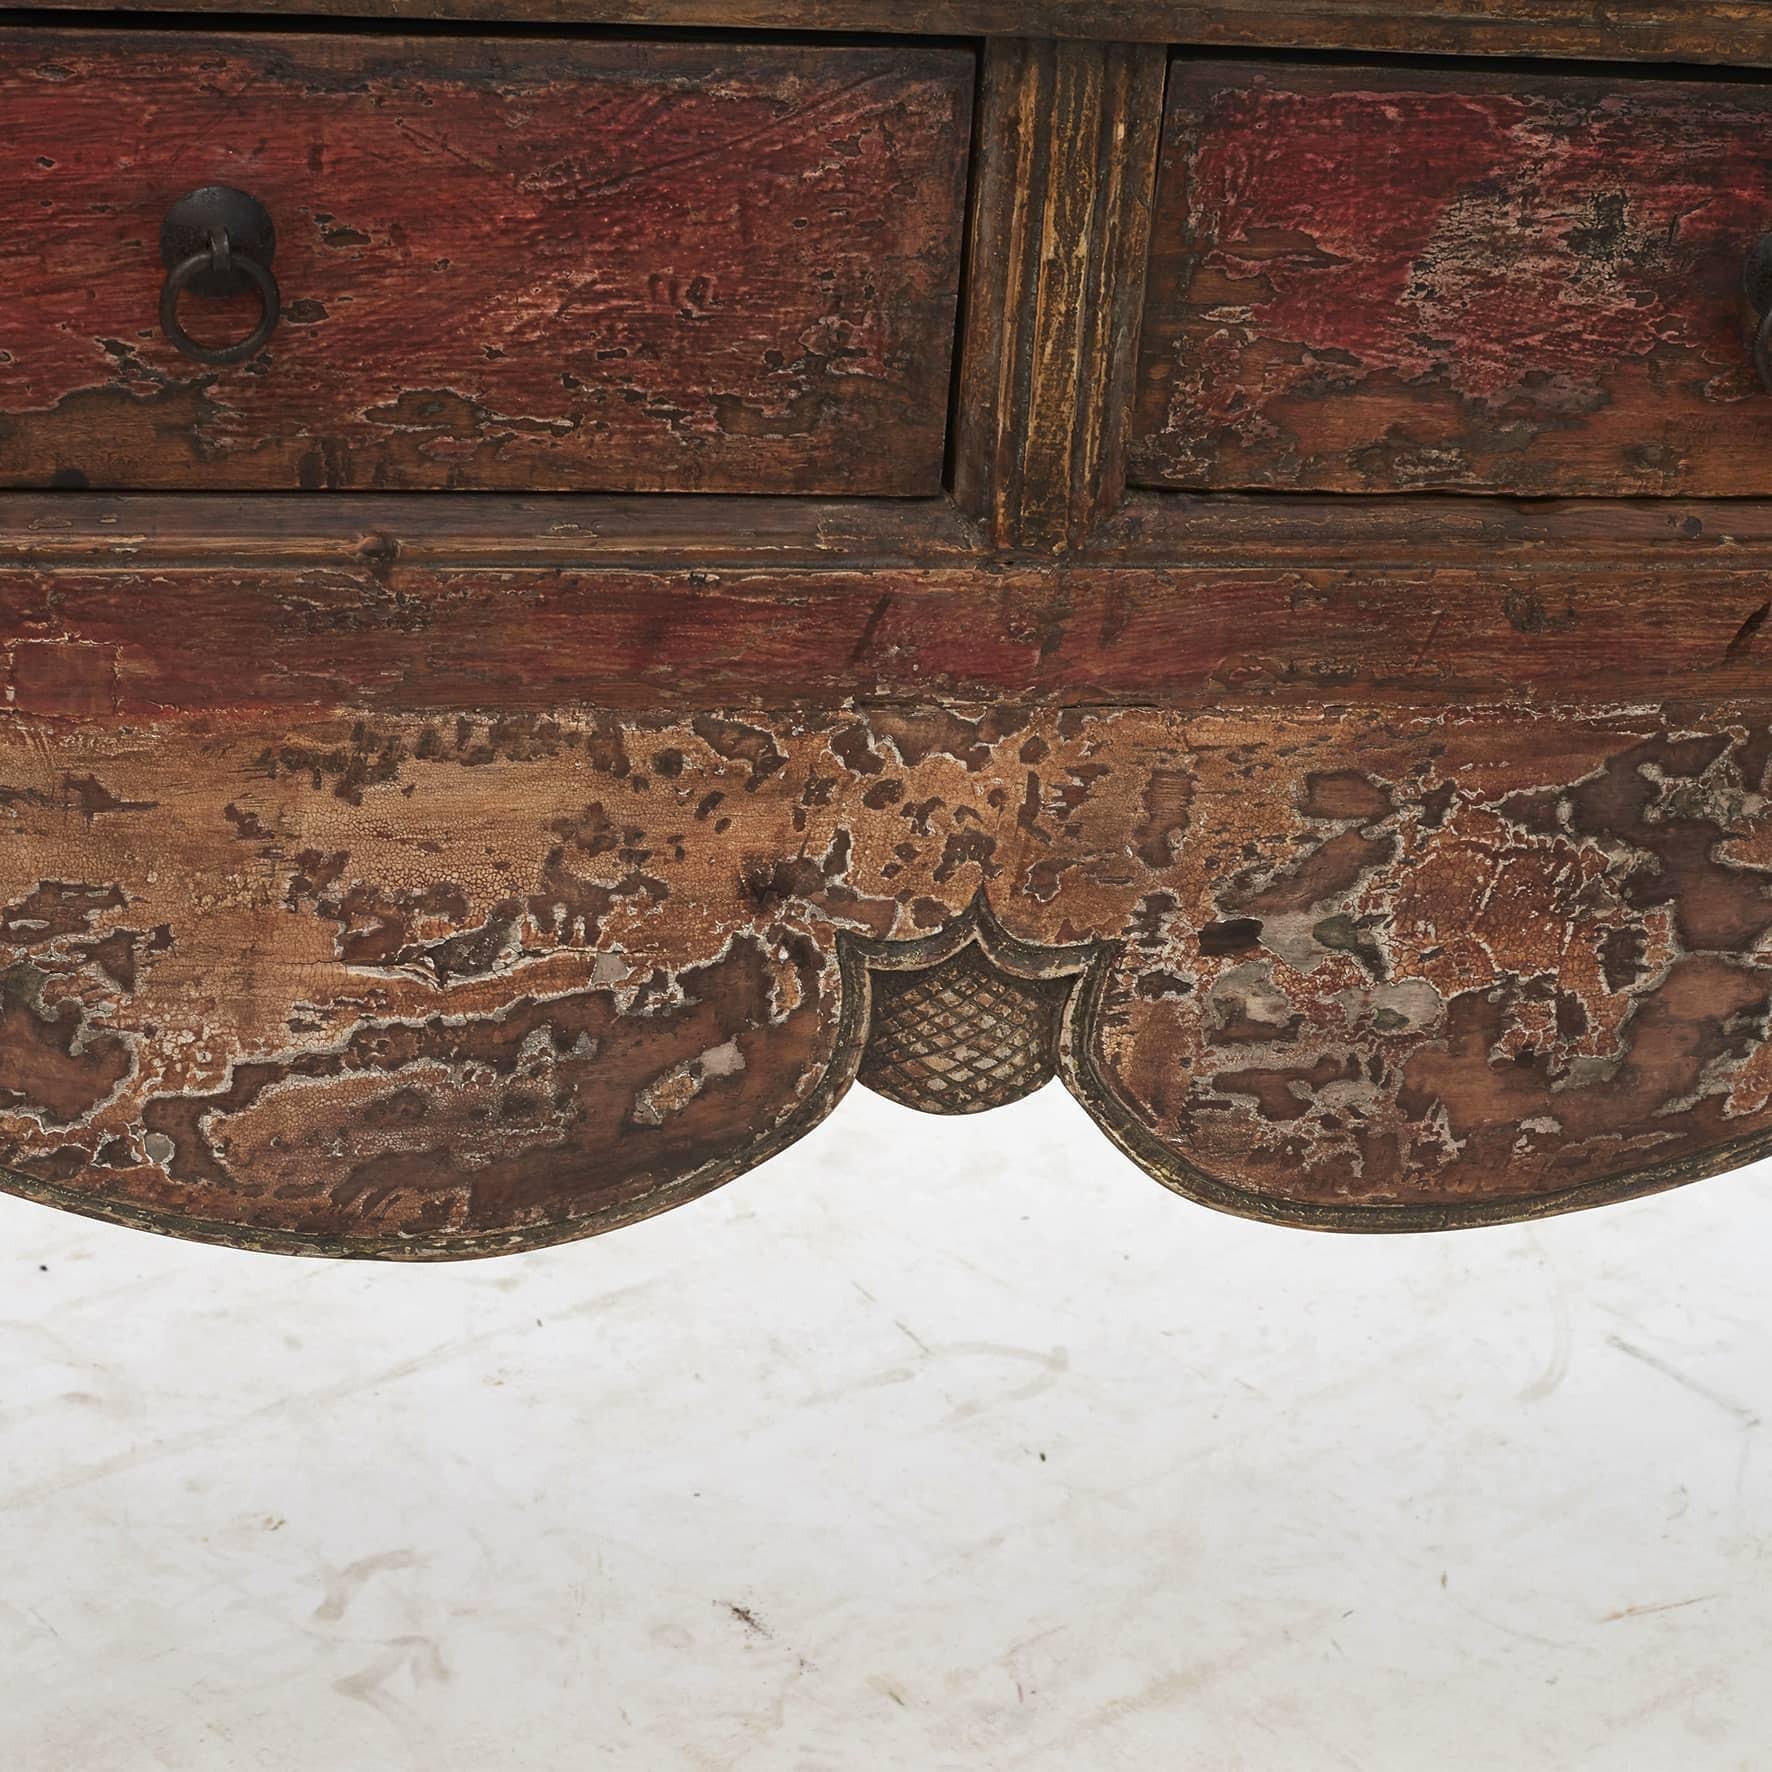 18th Century and Earlier Long Chinese Console Table 1500-1600 Century, Shanxi Province